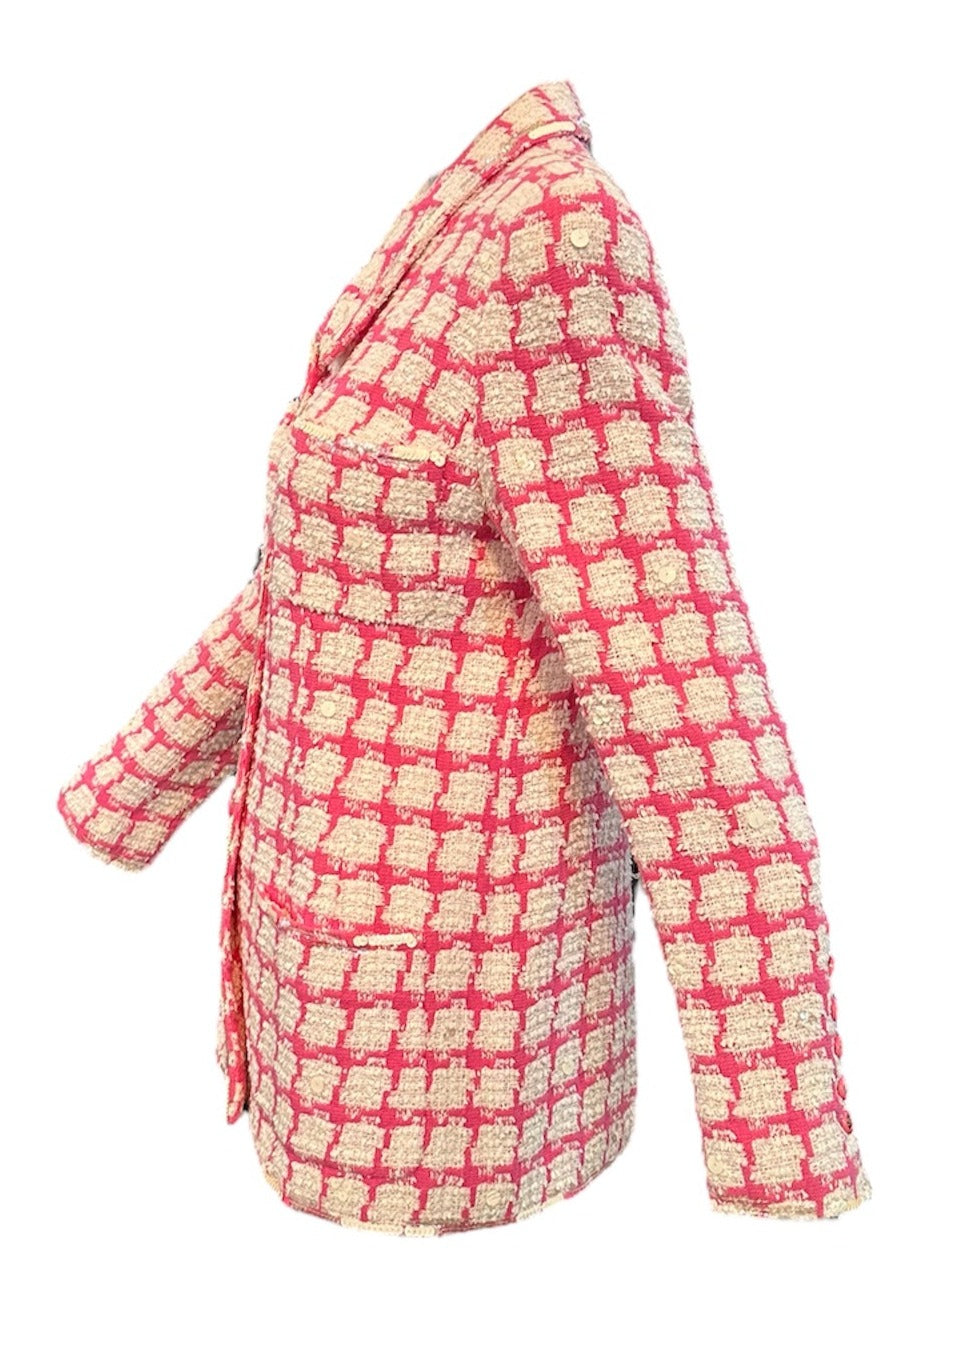 Chanel 90s Bubblegum Pink and White Gingham Jacket with Iridescent Sequins SIDE 2 of 8